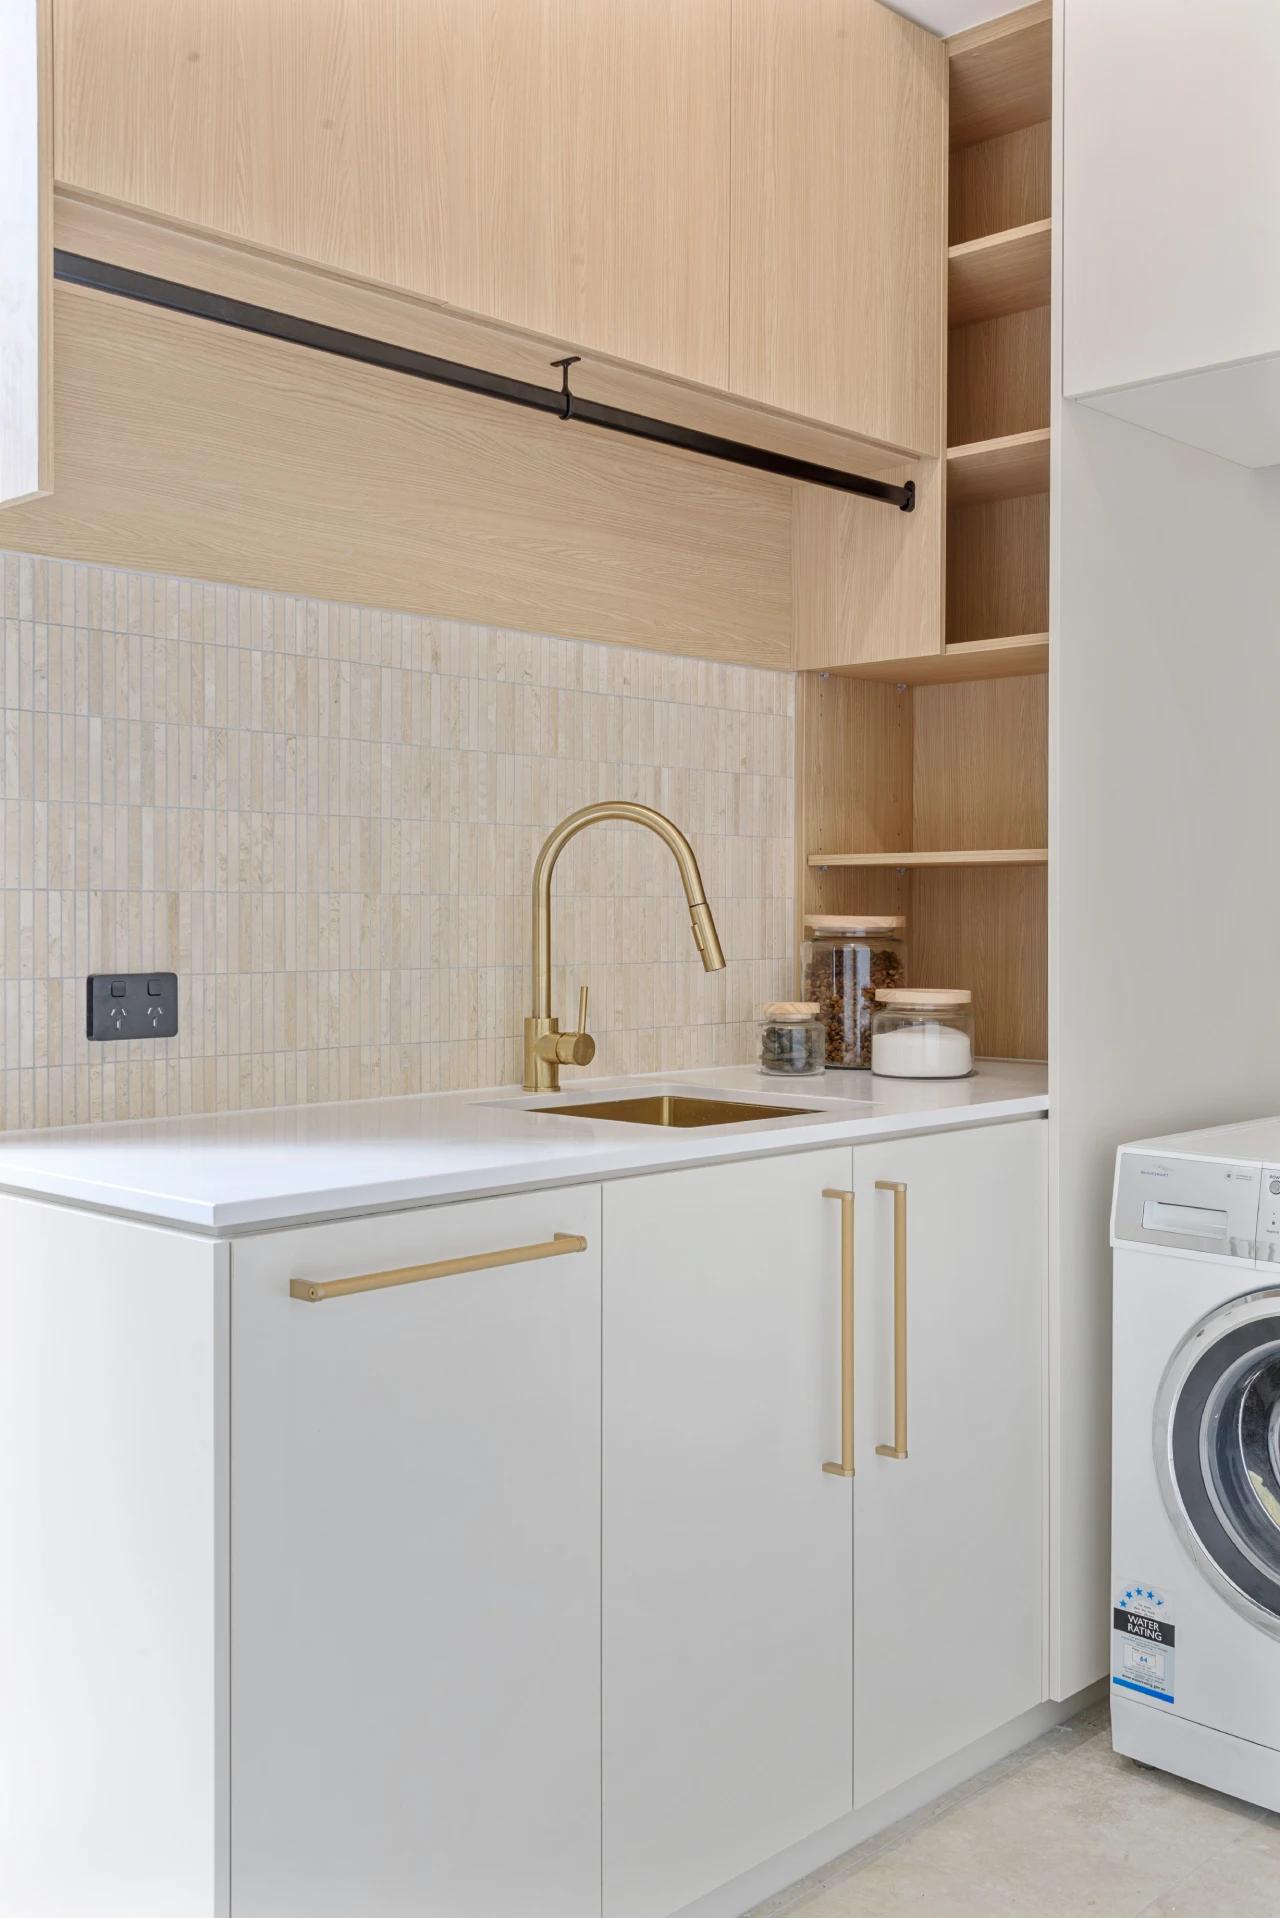 Laminex Board Laundry based in Hawthorne by Imperial Kitchens